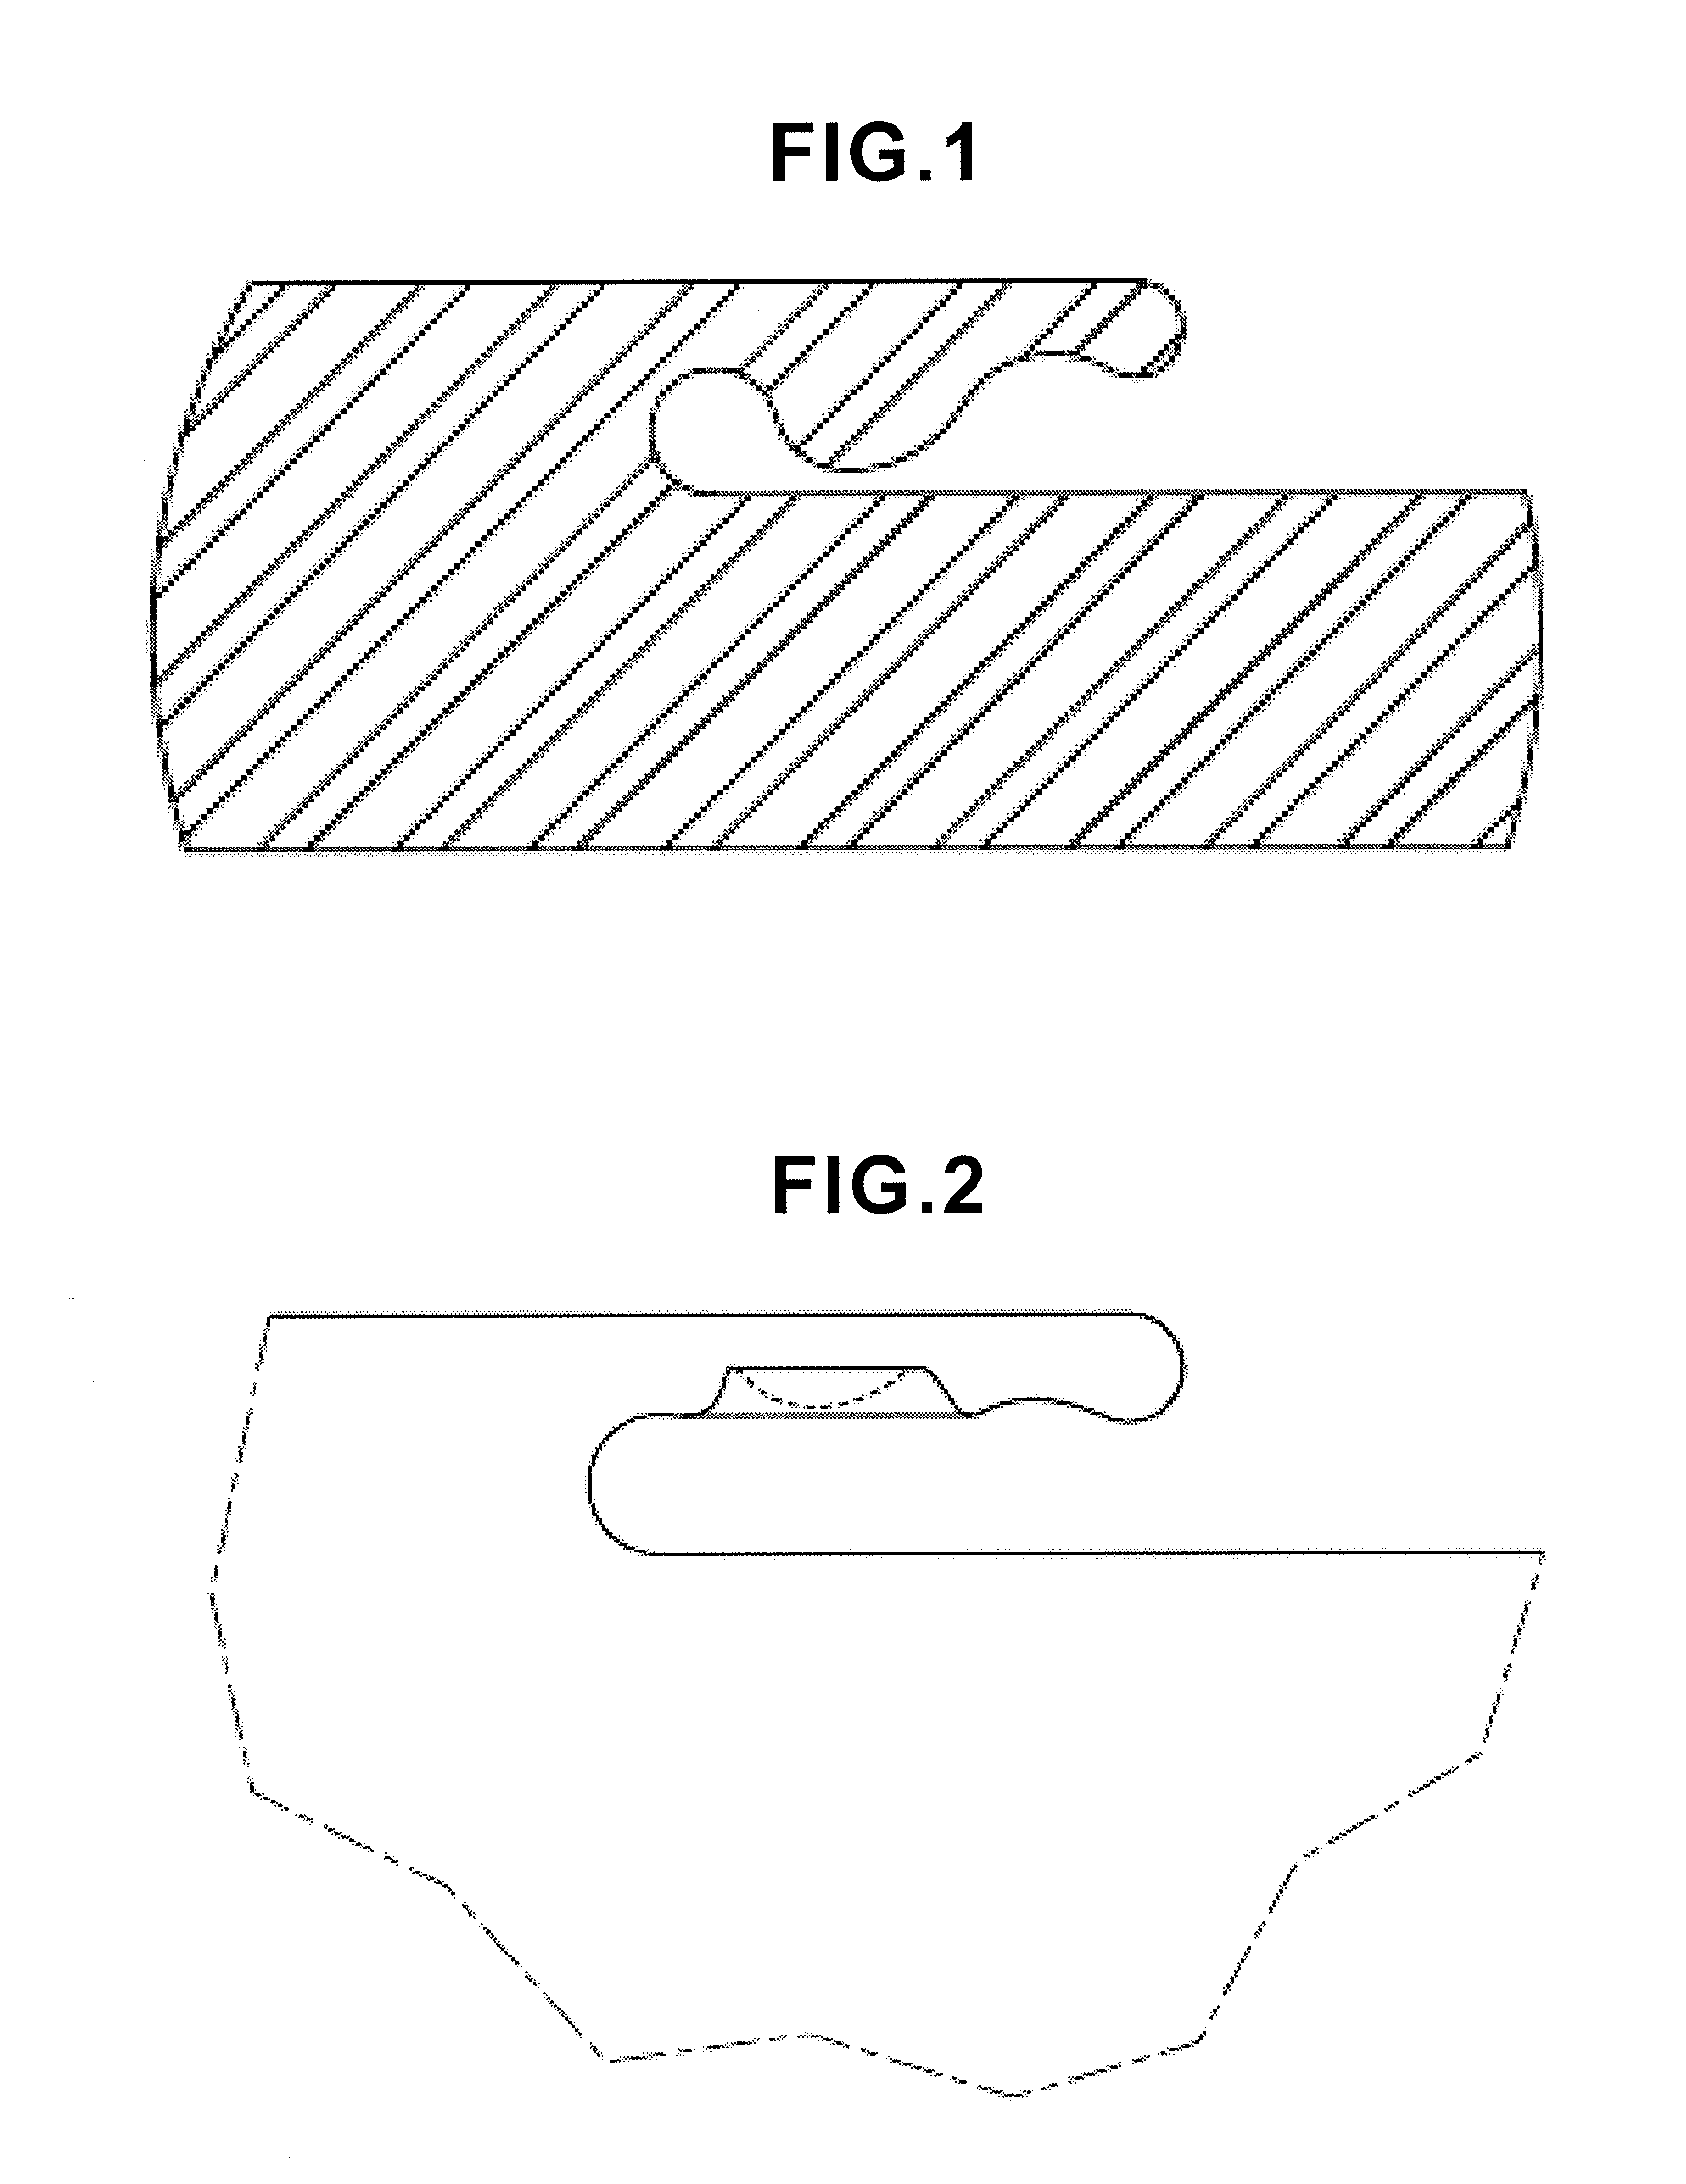 Multi-function element from a system for the filling or the storage of an article